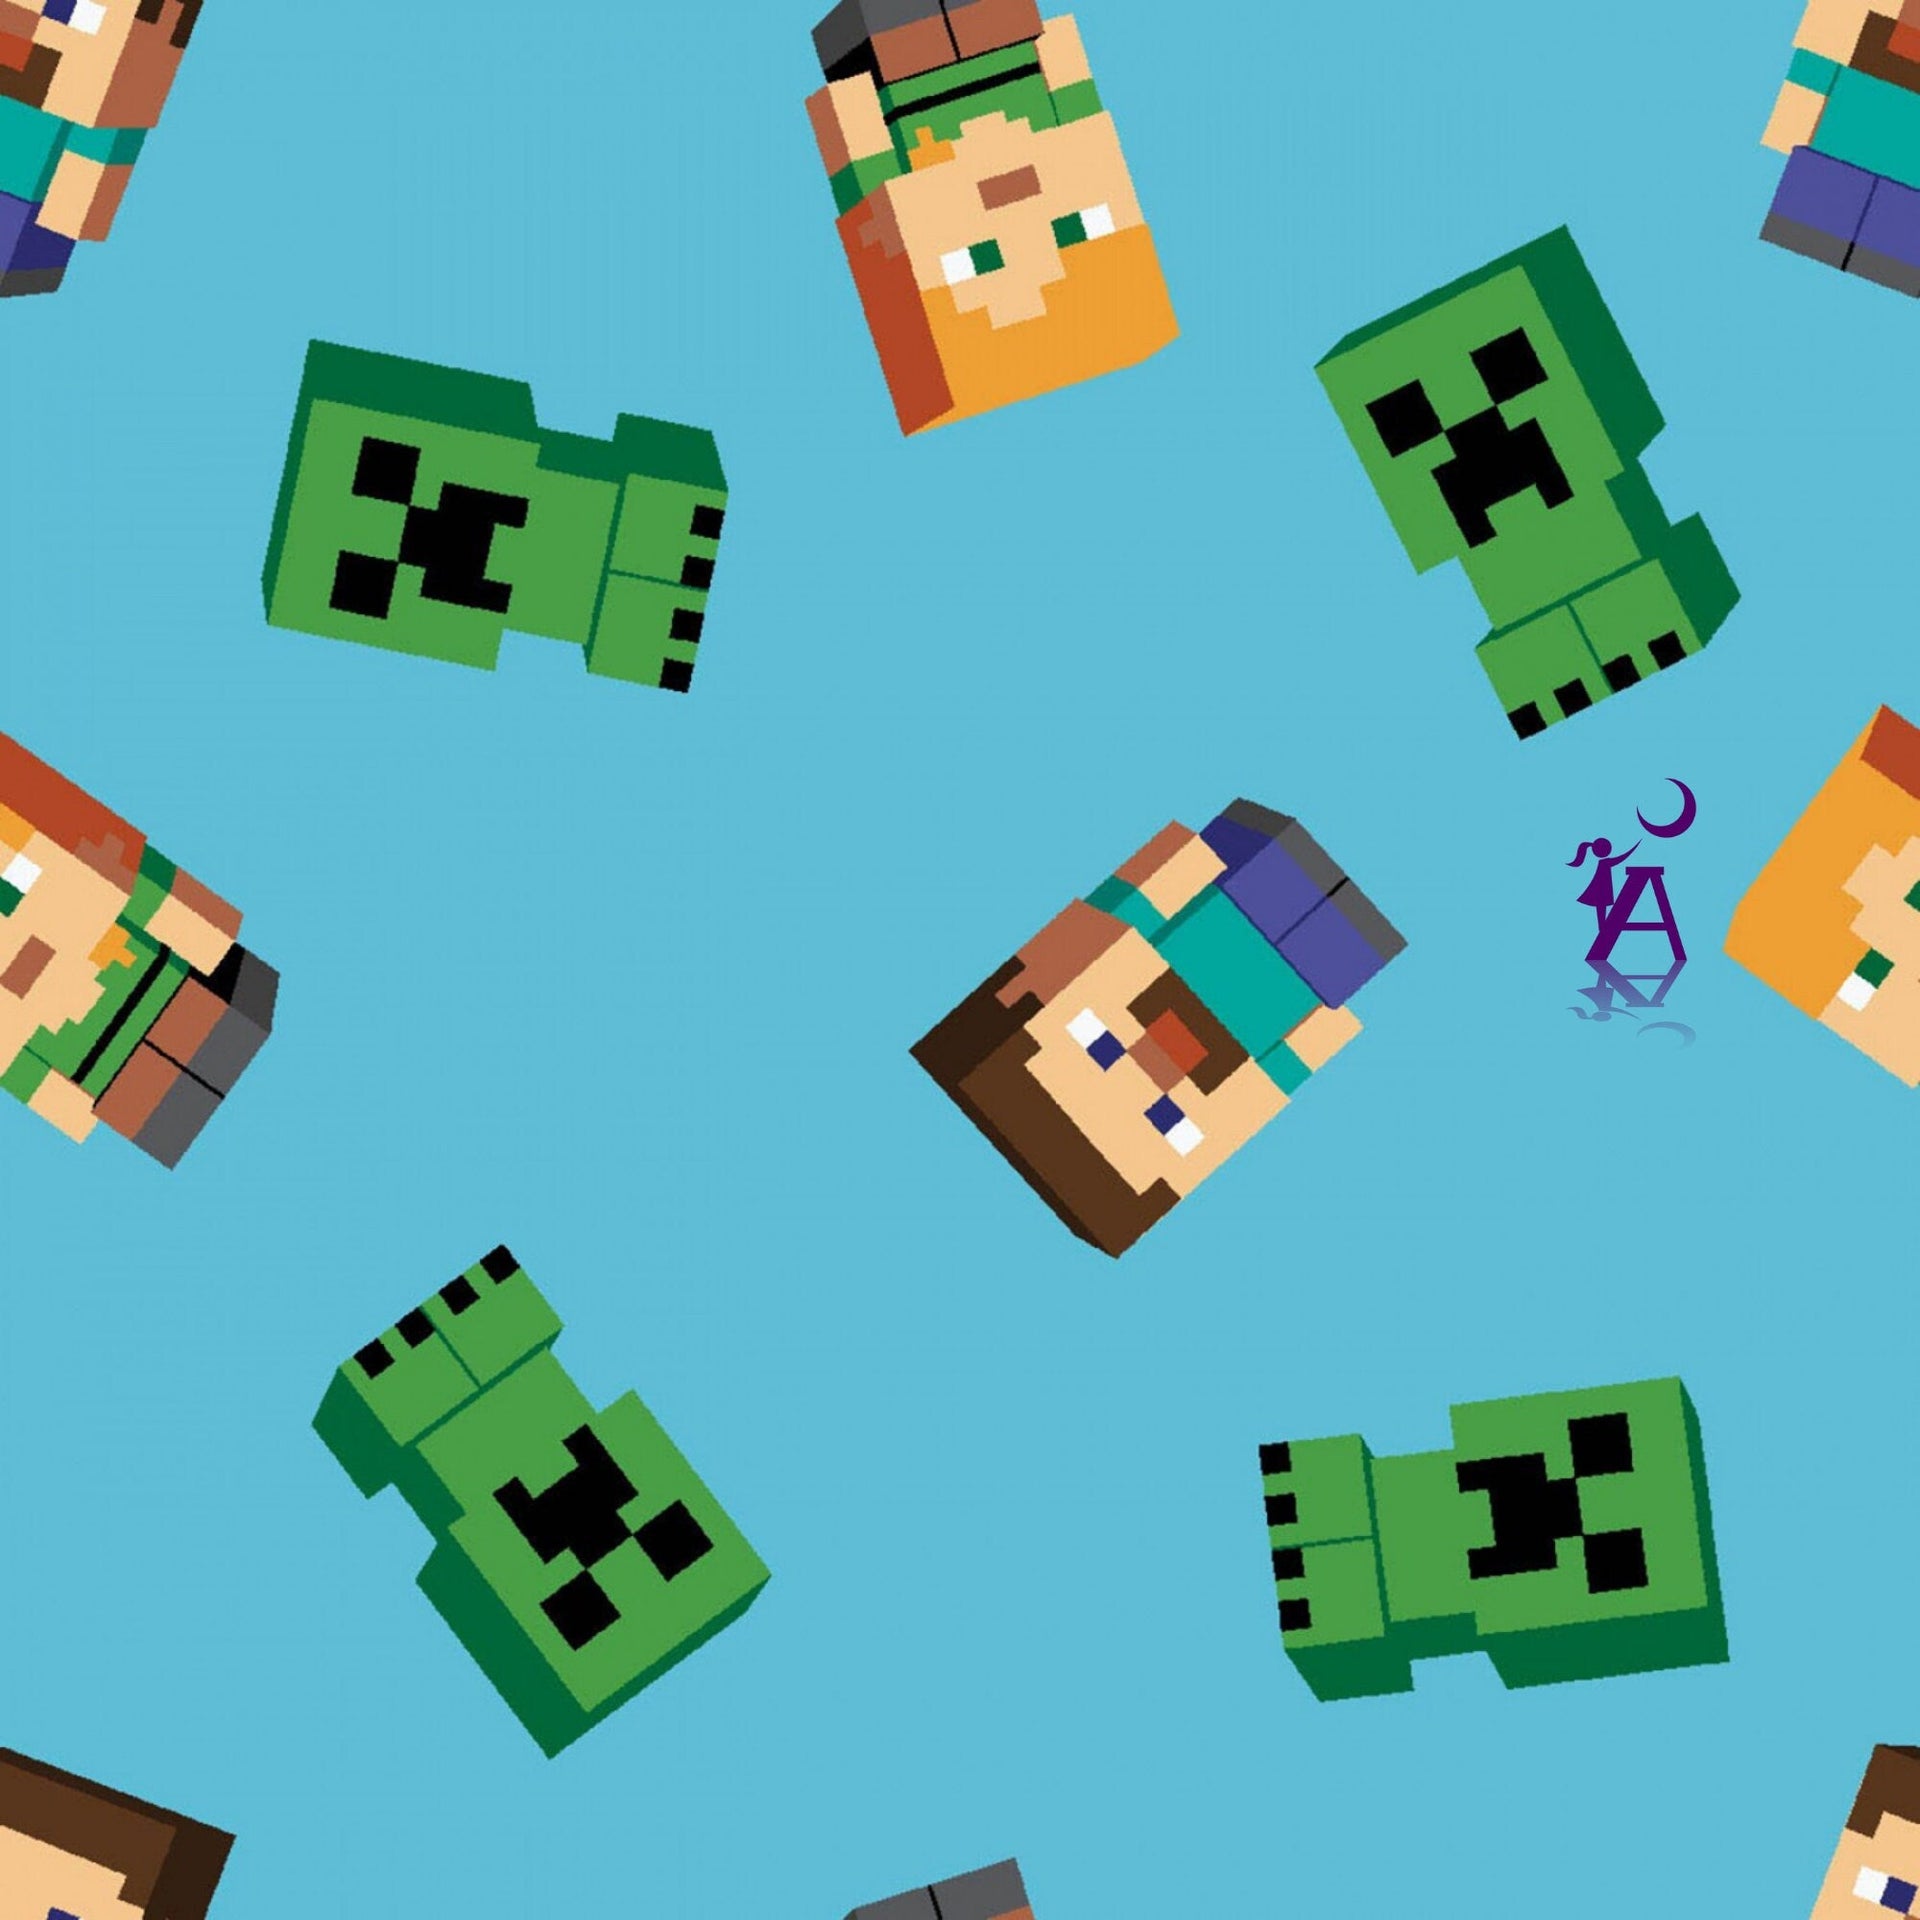 Minecraft Creeper Explode Cotton Fabric (2 Yards Min.) - Licensed & Character Cotton Fabric - Fabric